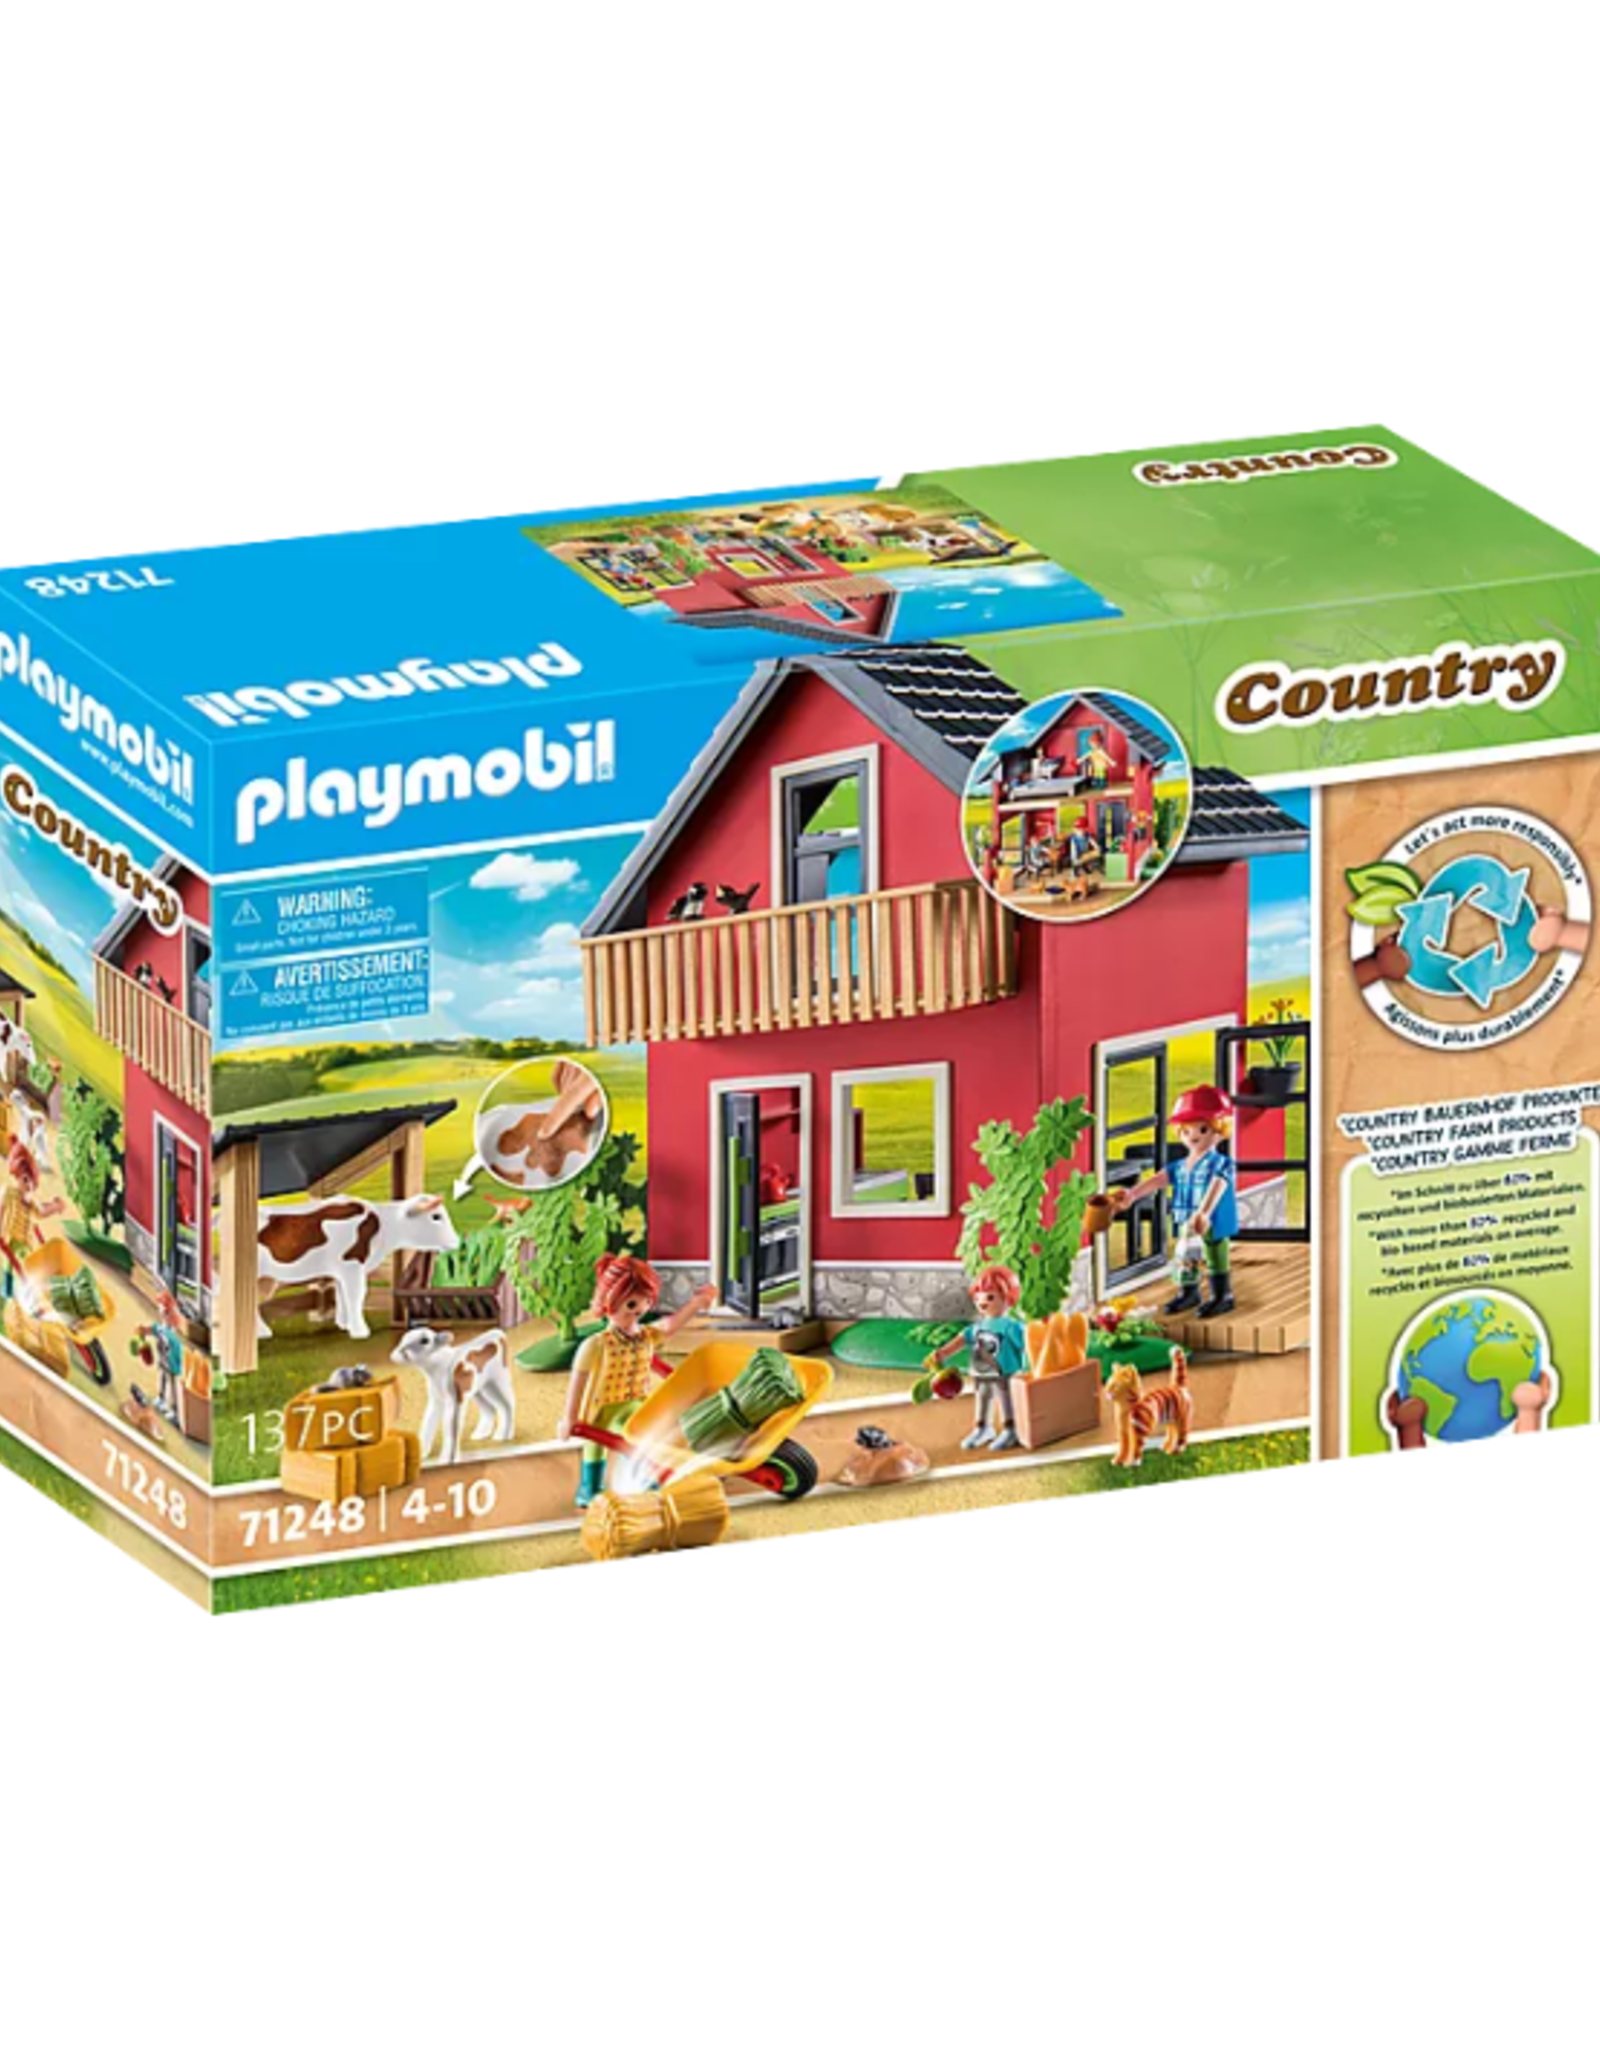 Playmobil Playmobil - Country - 71248 - Farmhouse with Outdoor Area